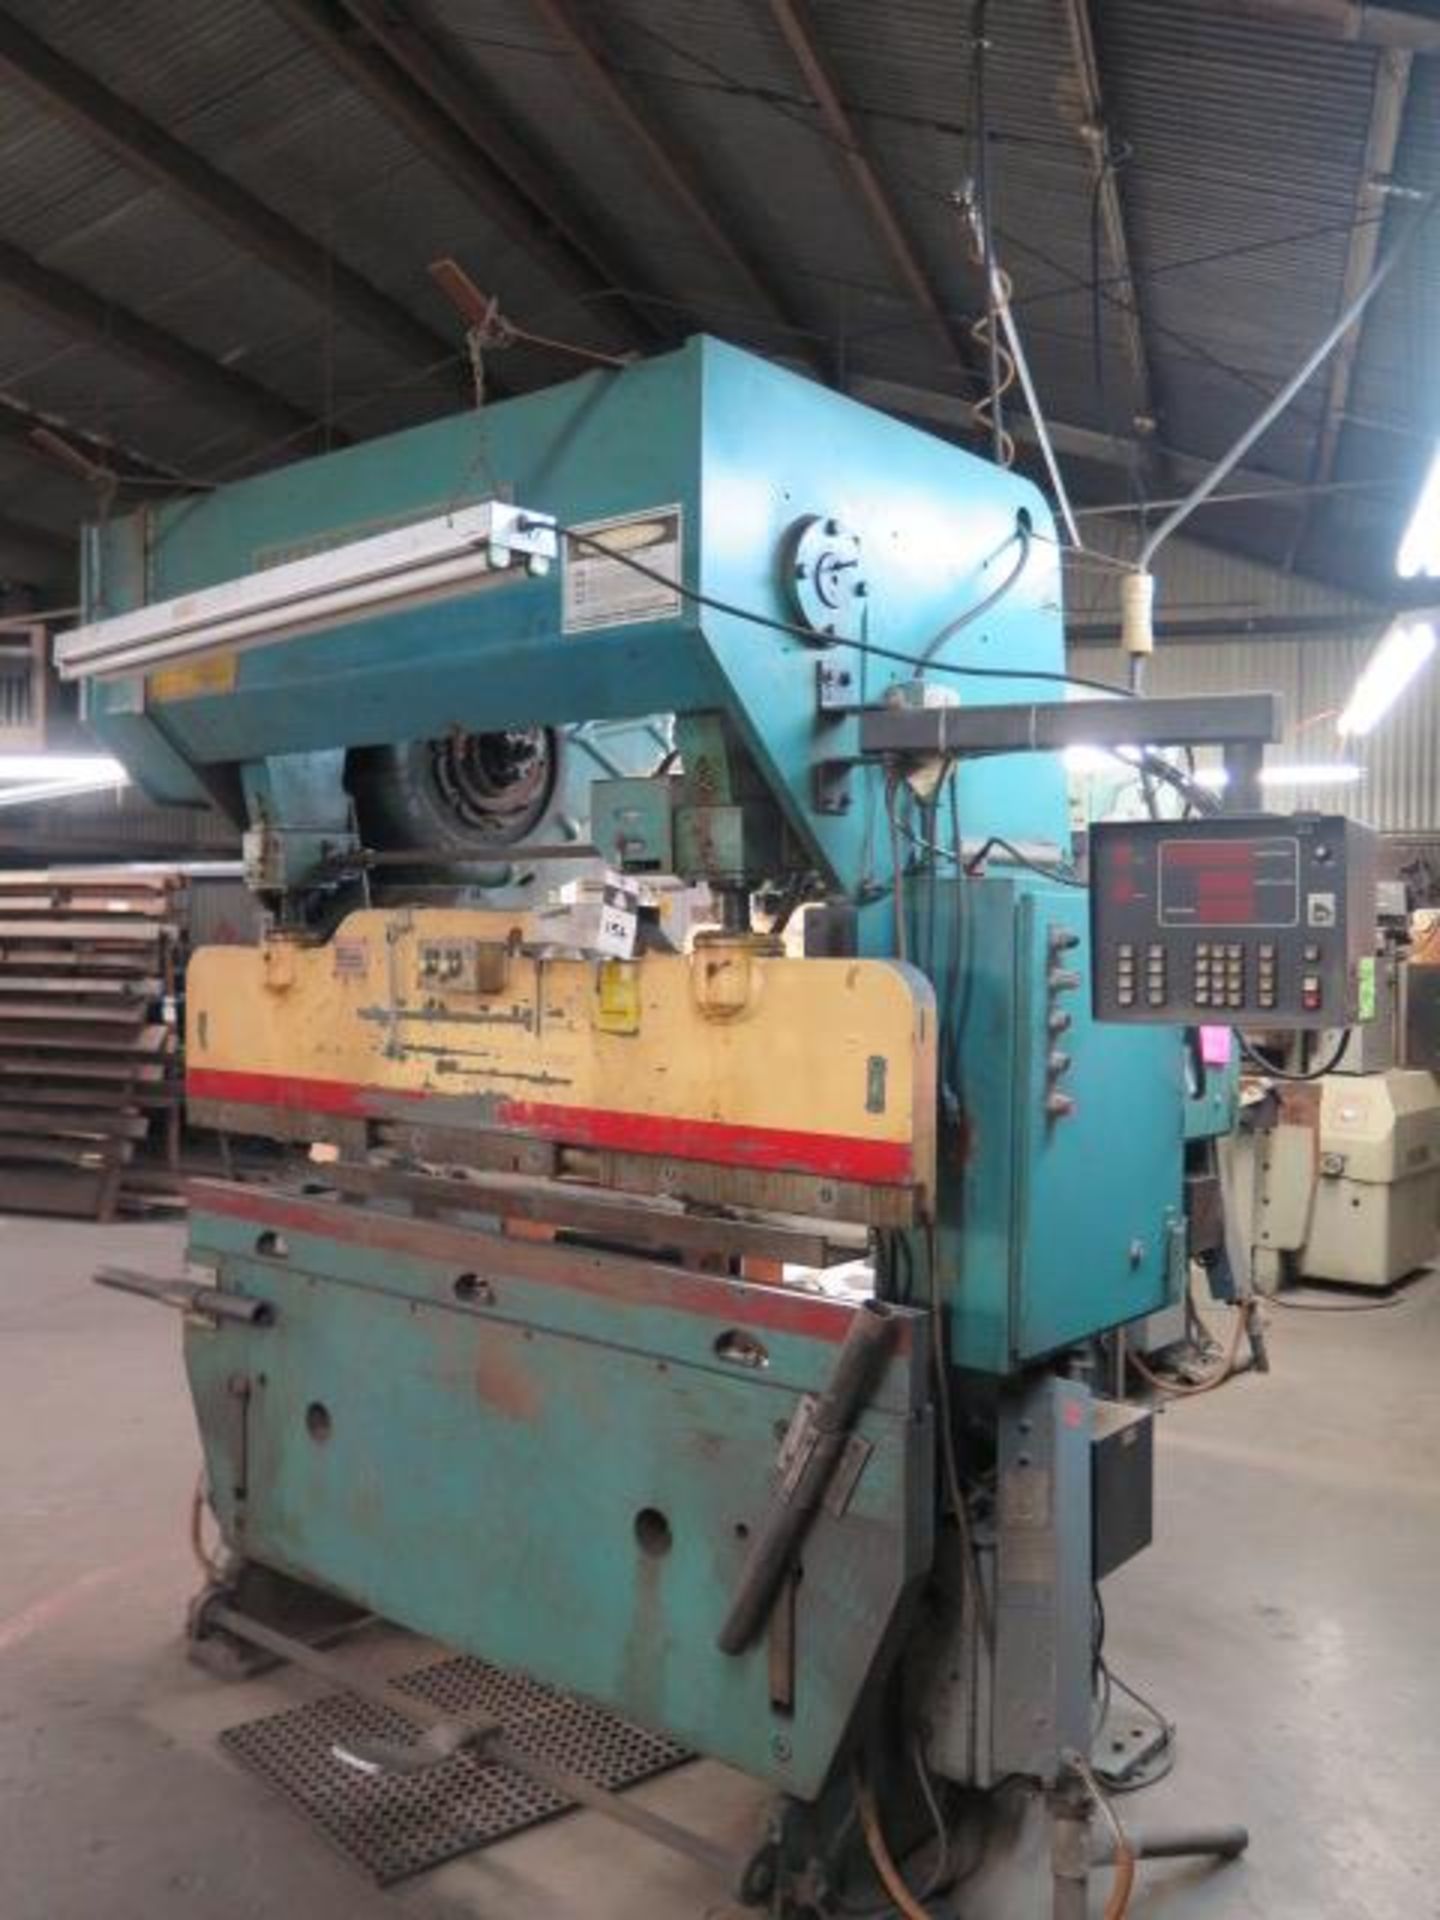 Wysong mdl. 55-4 55 Ton x 6’ CNC Press Brake w/ Dynabend 1 Controls and Back Gaging, SOLD AS IS - Image 3 of 17